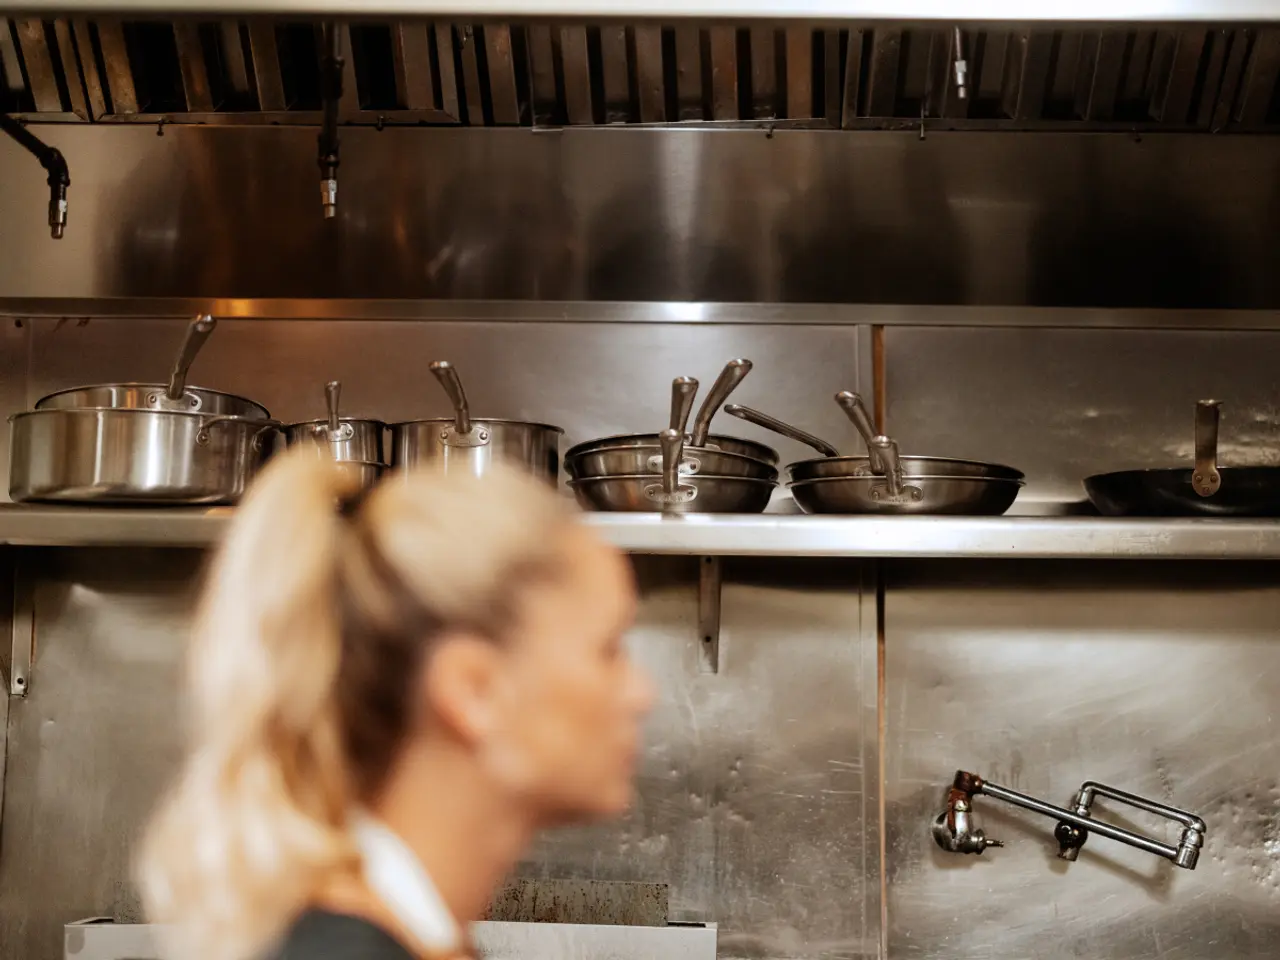 A professional kitchen with stainless steel equipment and cookware is blurred in the background behind a focused woman with her hair tied back.